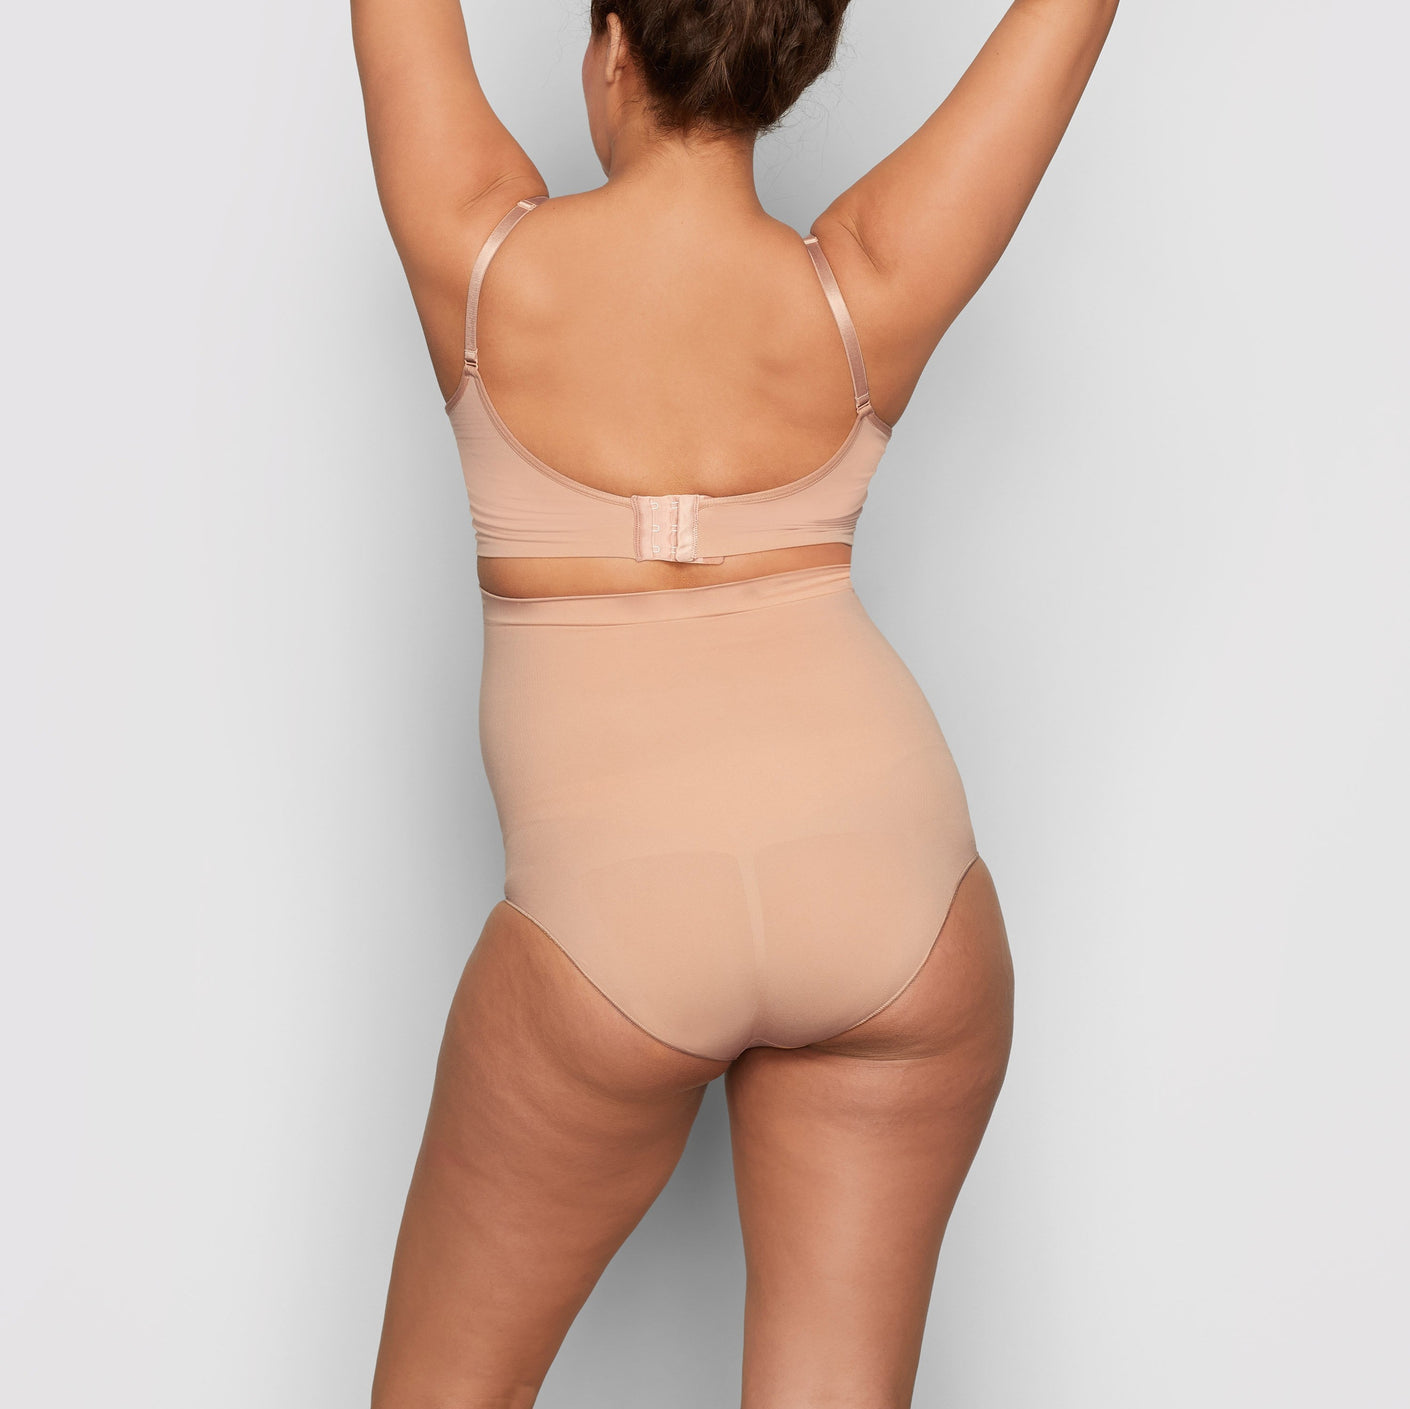 SKIMS Maternity Sculpting High Waisted Brief Nude/Clay XXS/XS NWOT Tan Size  undefined - $25 - From Jessica